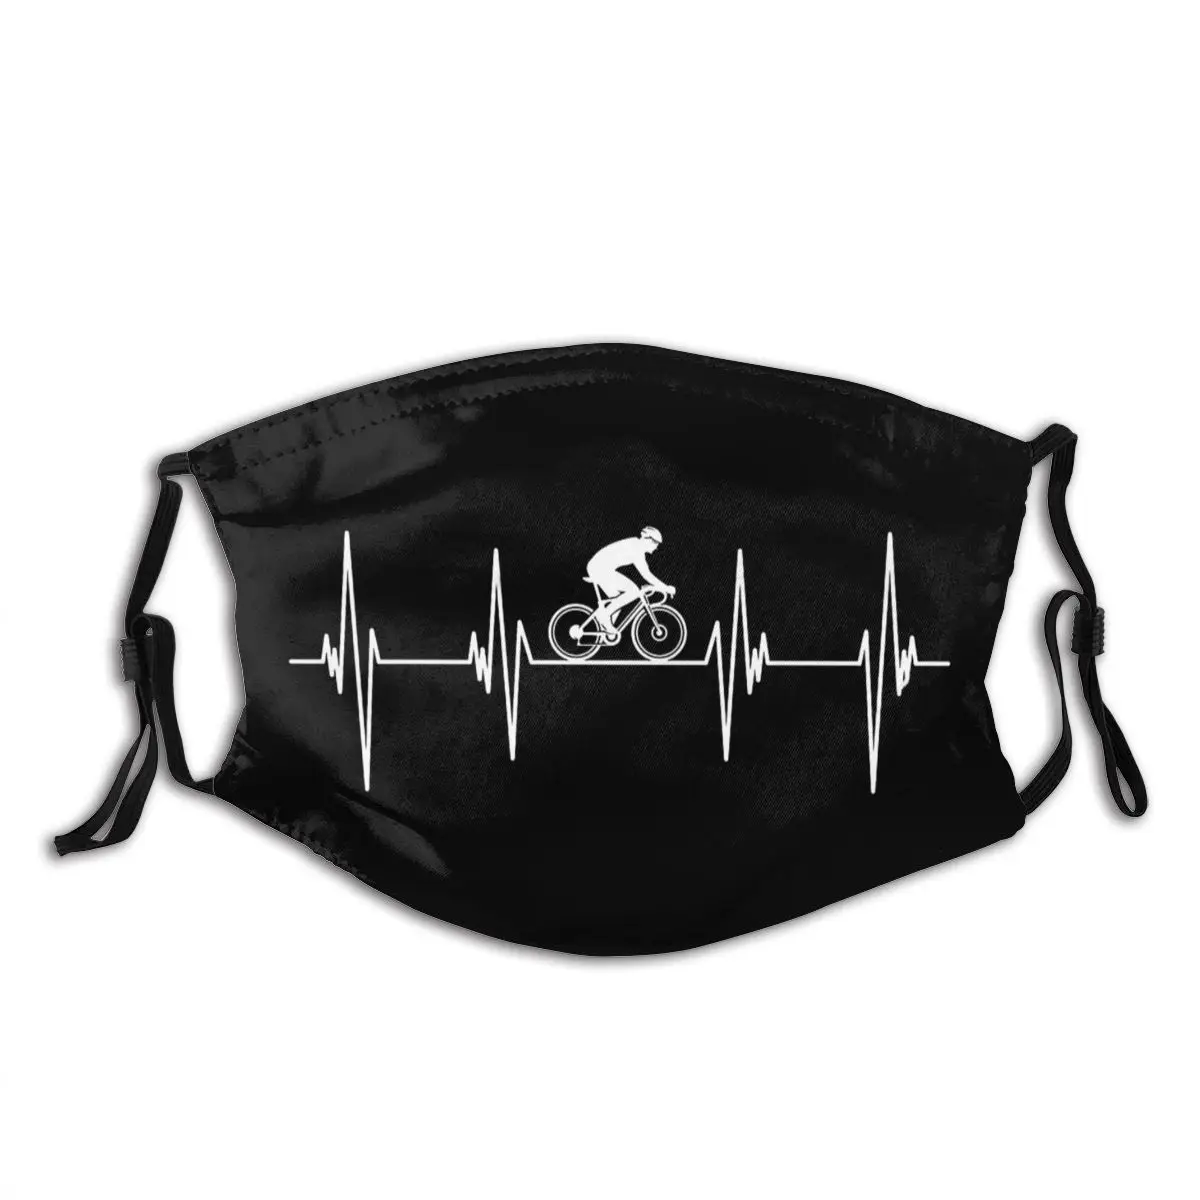 

Road Cyclist Heartbeat Bike Lover Sports Washable Mouth Face Mask Windproof Dust Proof with Filters Earloop Protection Cover